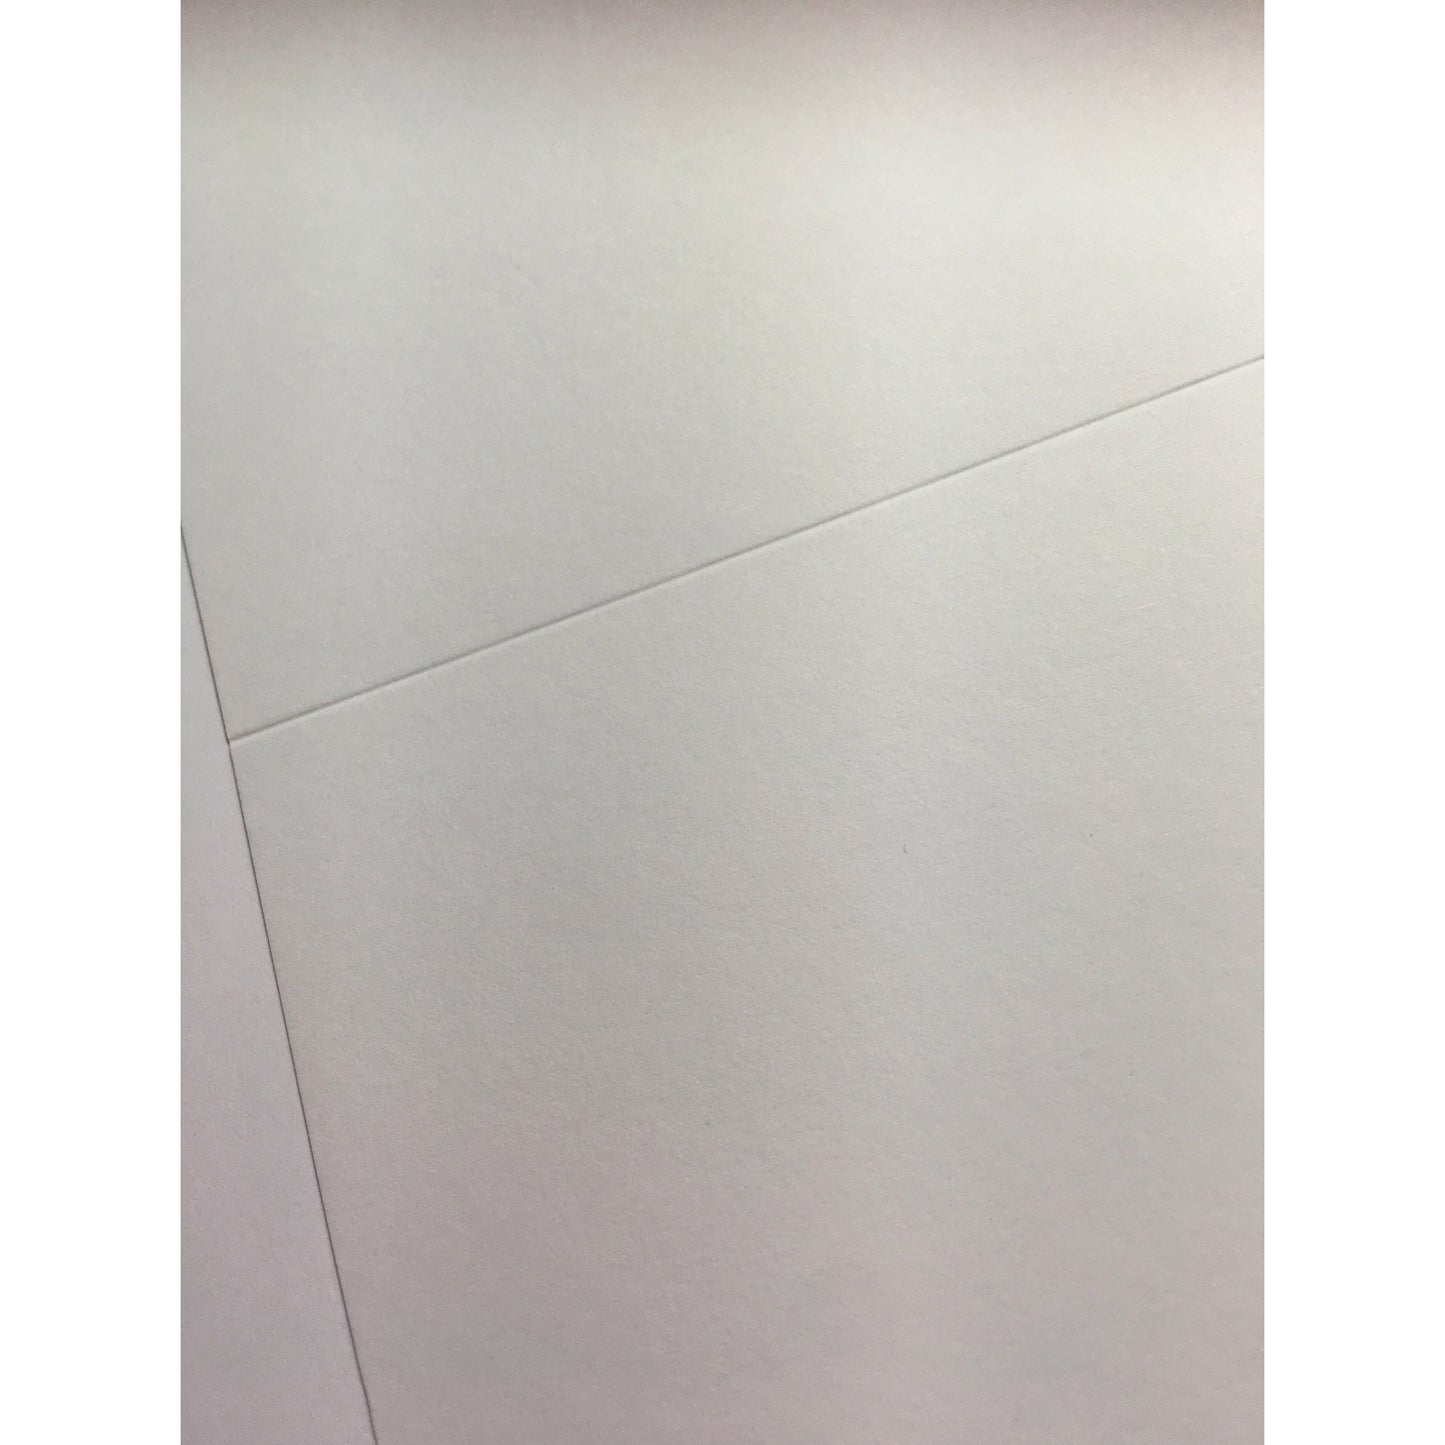 White Smooth Card 350gsm Pack of 20 Sheets Choose Size